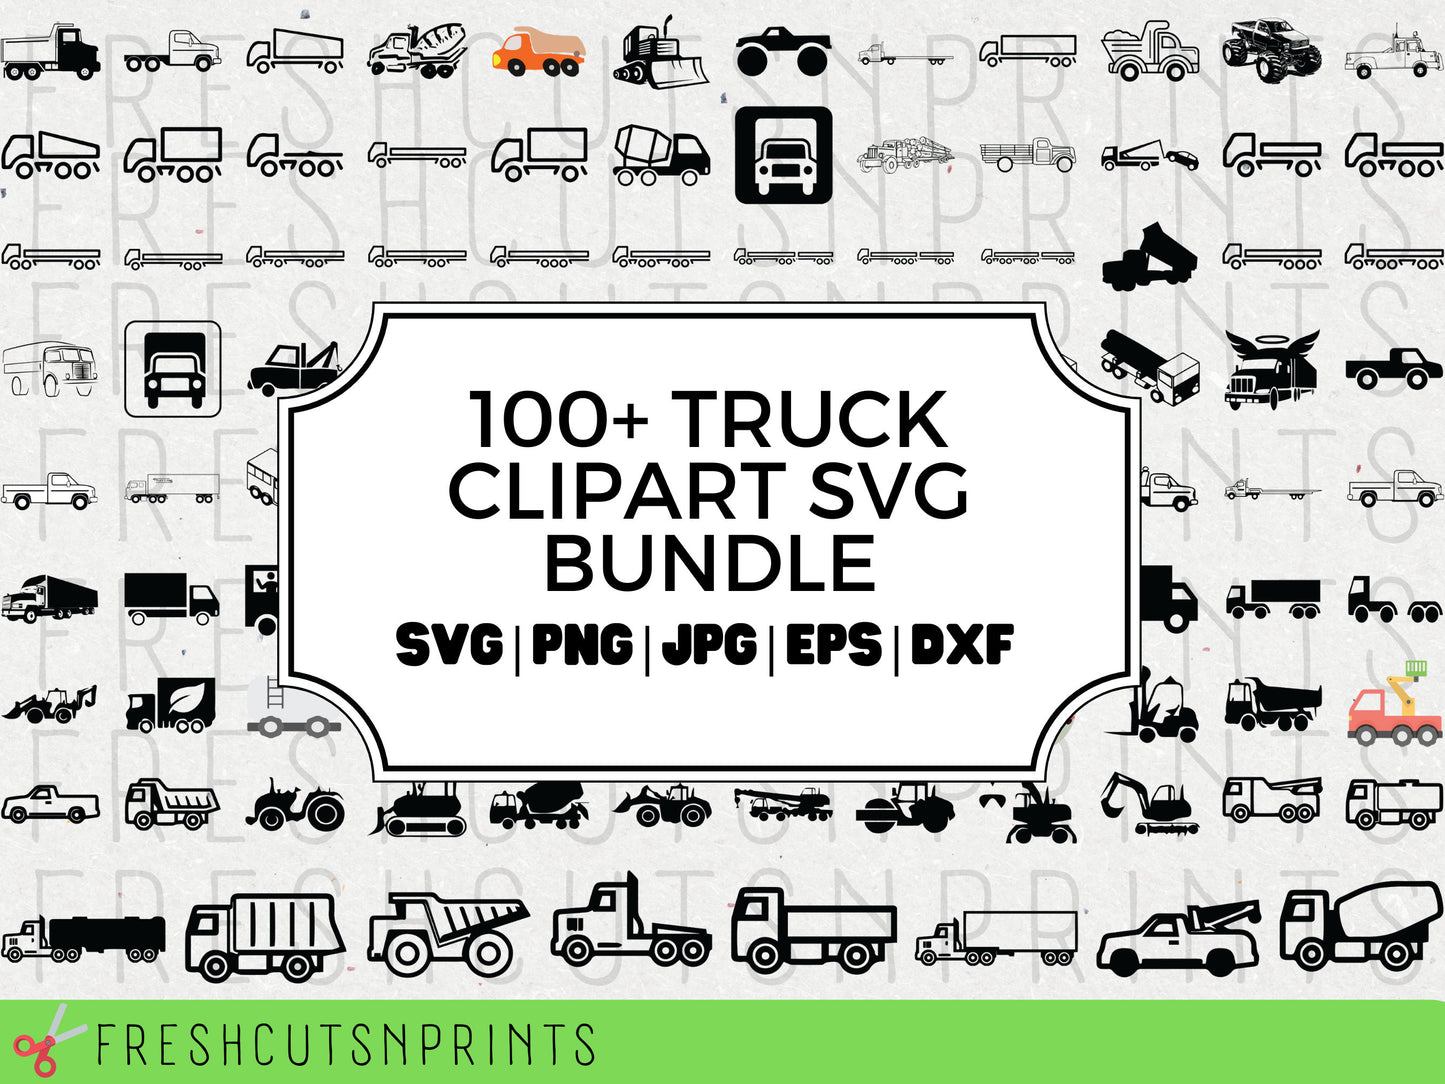 100+ Truck SVG Bundle , Truck Clipart, Truck Cut Files, Truck Vector, Tractor svg,  Truck Silhouette, Pickup Truck svg, Commercial Use